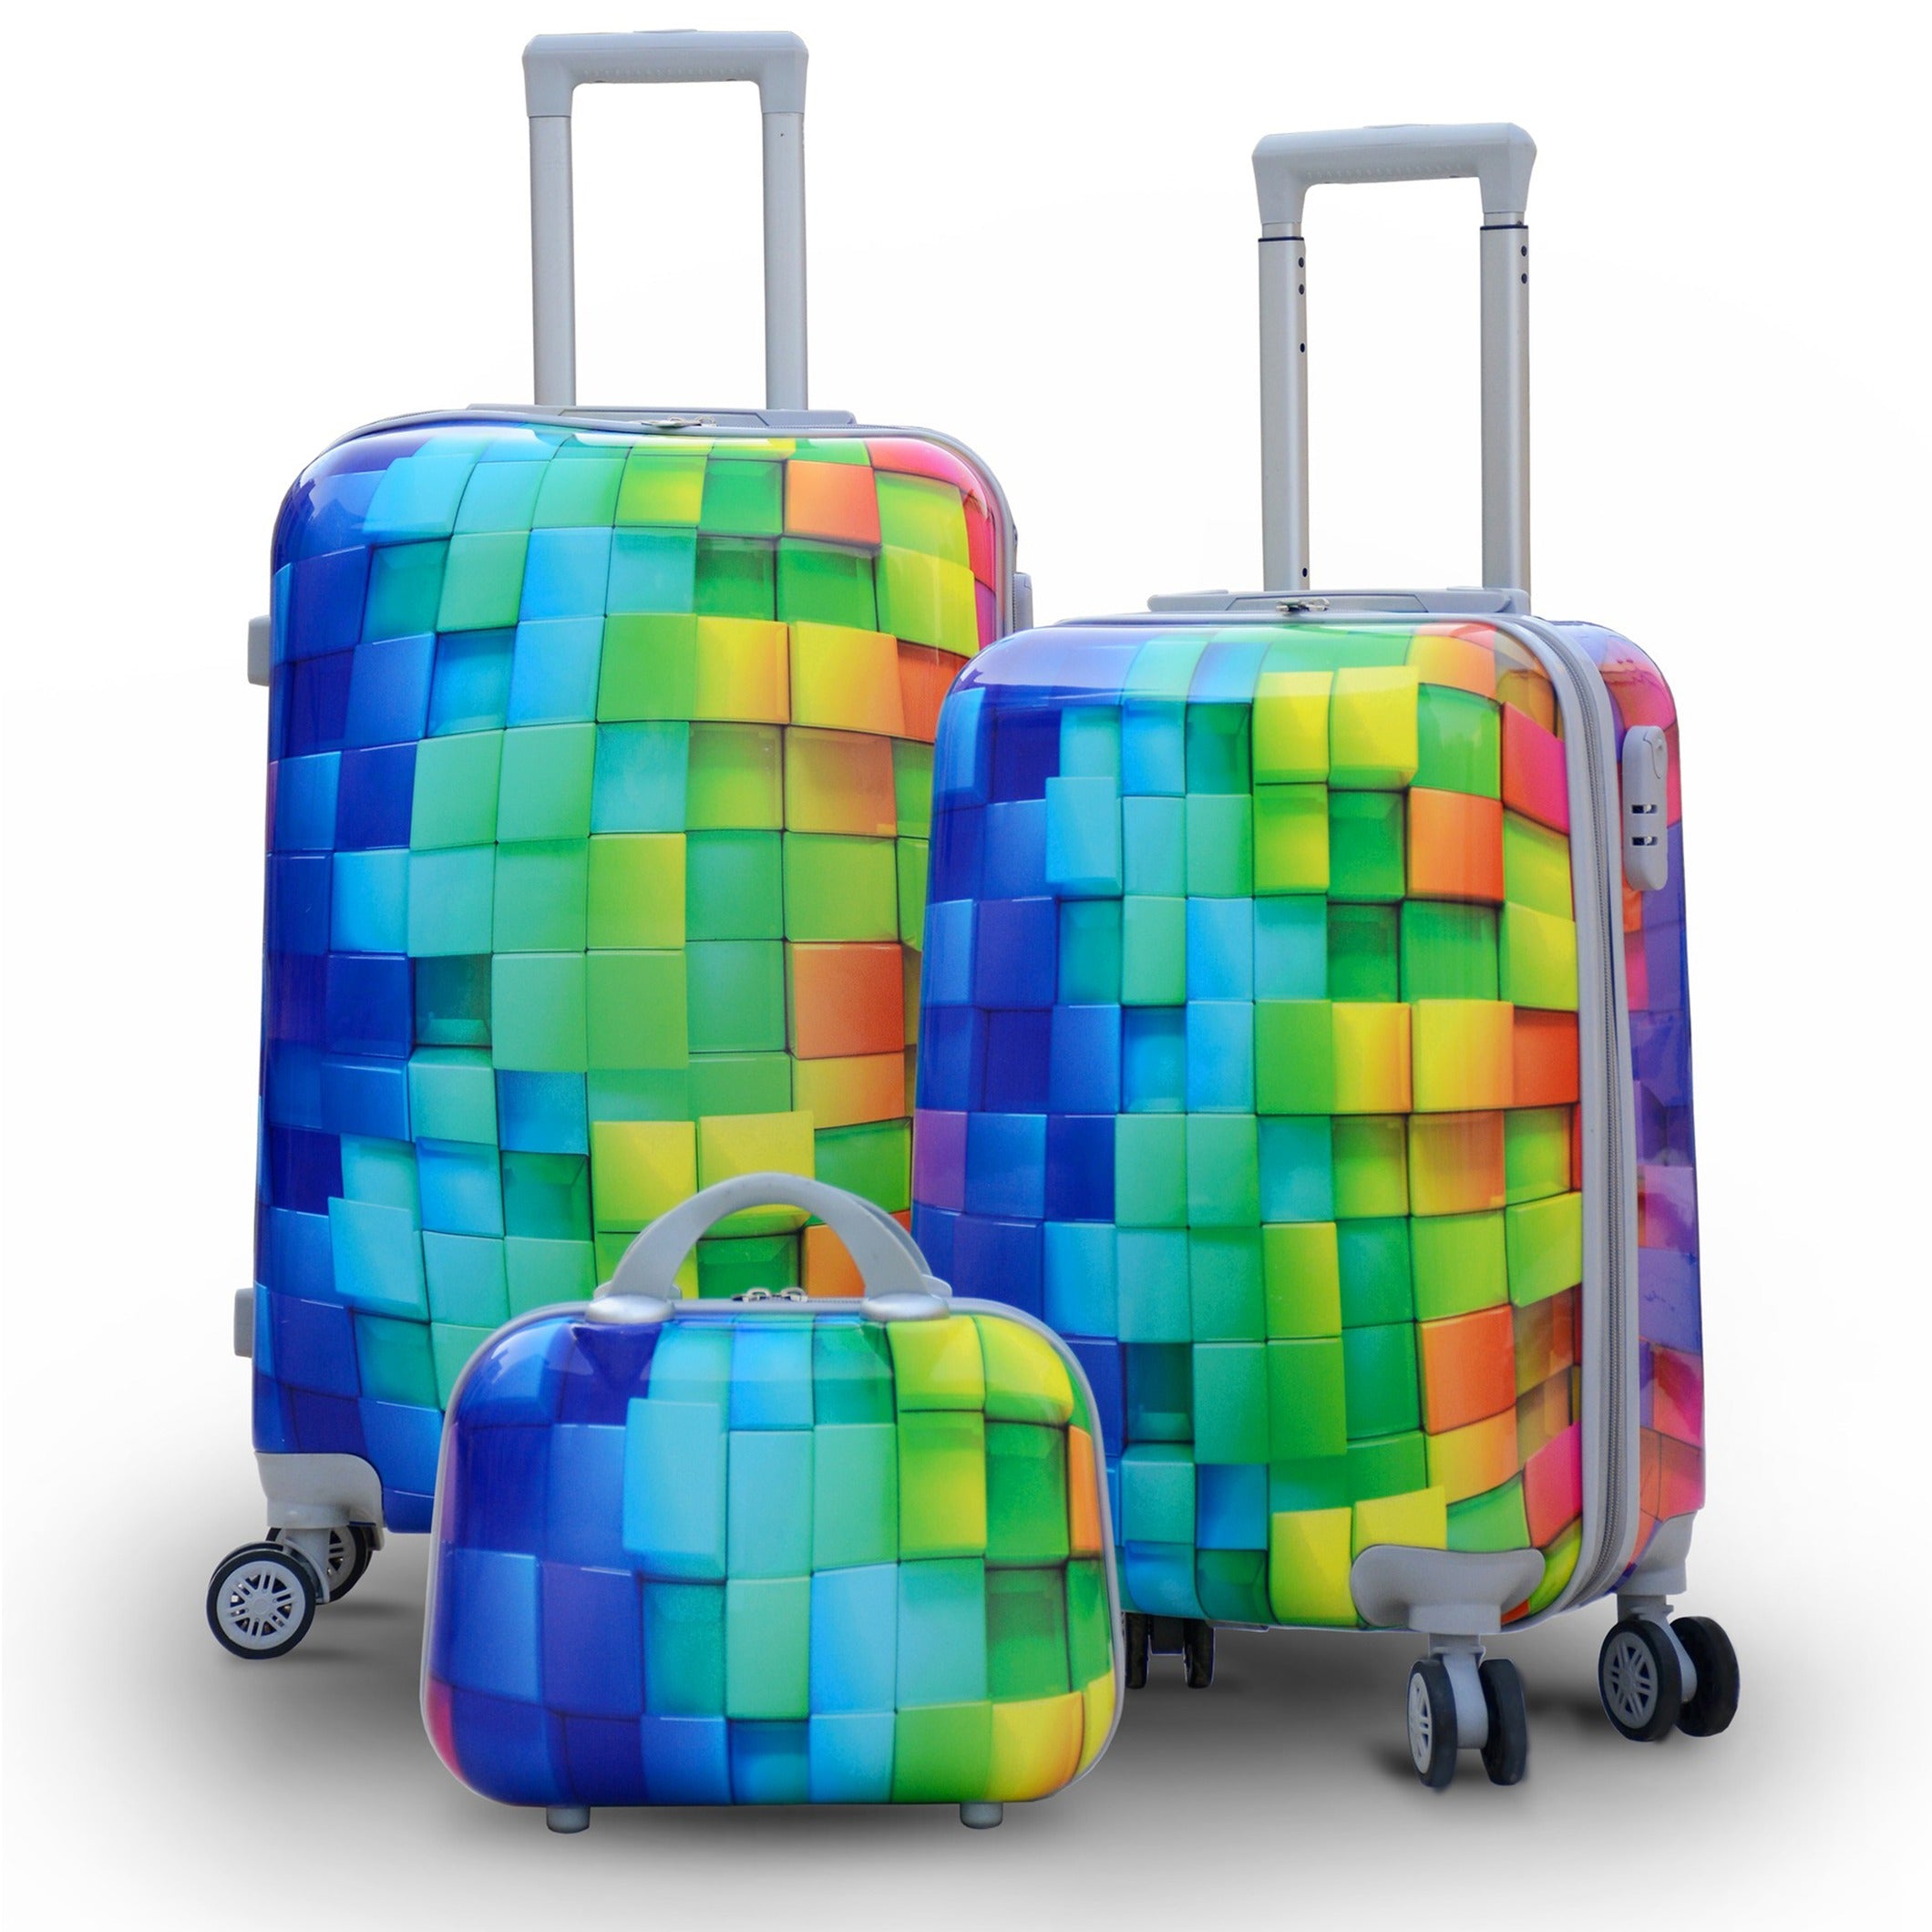 3D Printed Lightweight ABS Luggage | Hard Case Trolley Bag | 4 Pcs Full Set 7" 20" 24" 28 Inches